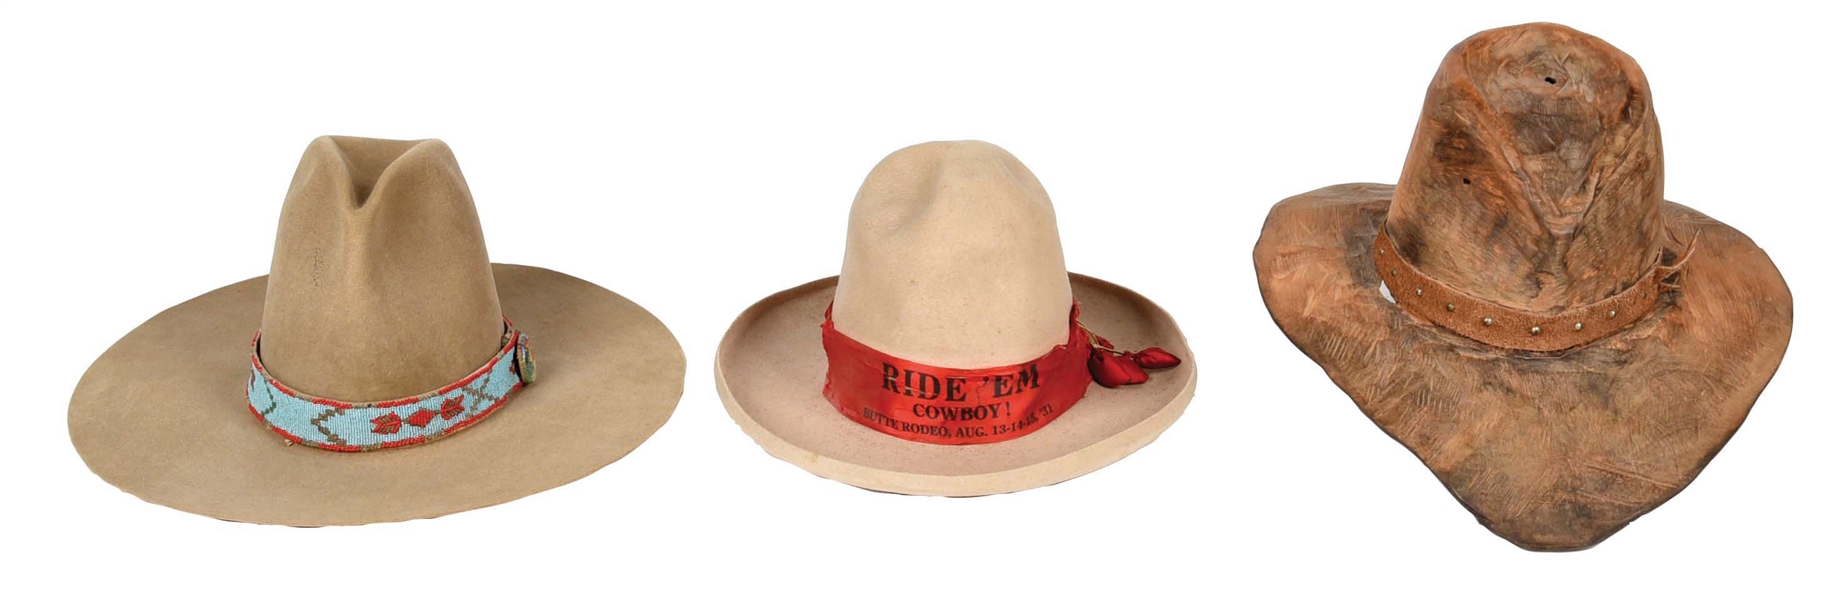 LOT OF 3: COWBOY HATS - WOODEN, RODEO BAND & BEADED. 